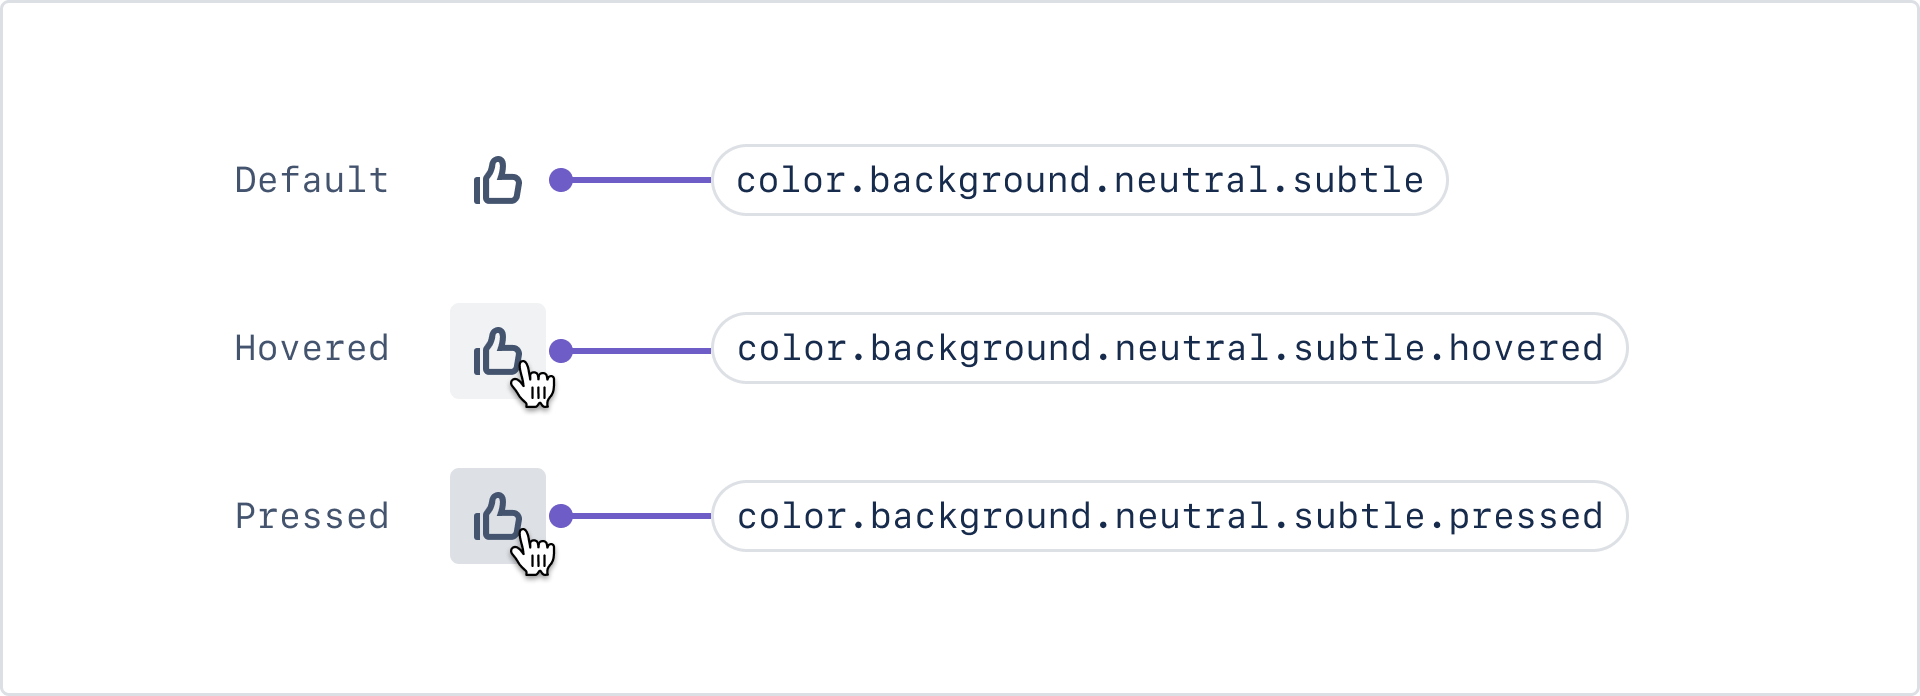 Icon interaction states. The default icon background uses “color.background.neutral.subtle”, the hovered icon background uses “color.background.neutral.subtle.hovered”, and the pressed icon background uses “color.background.neutral.subtle.pressed.”